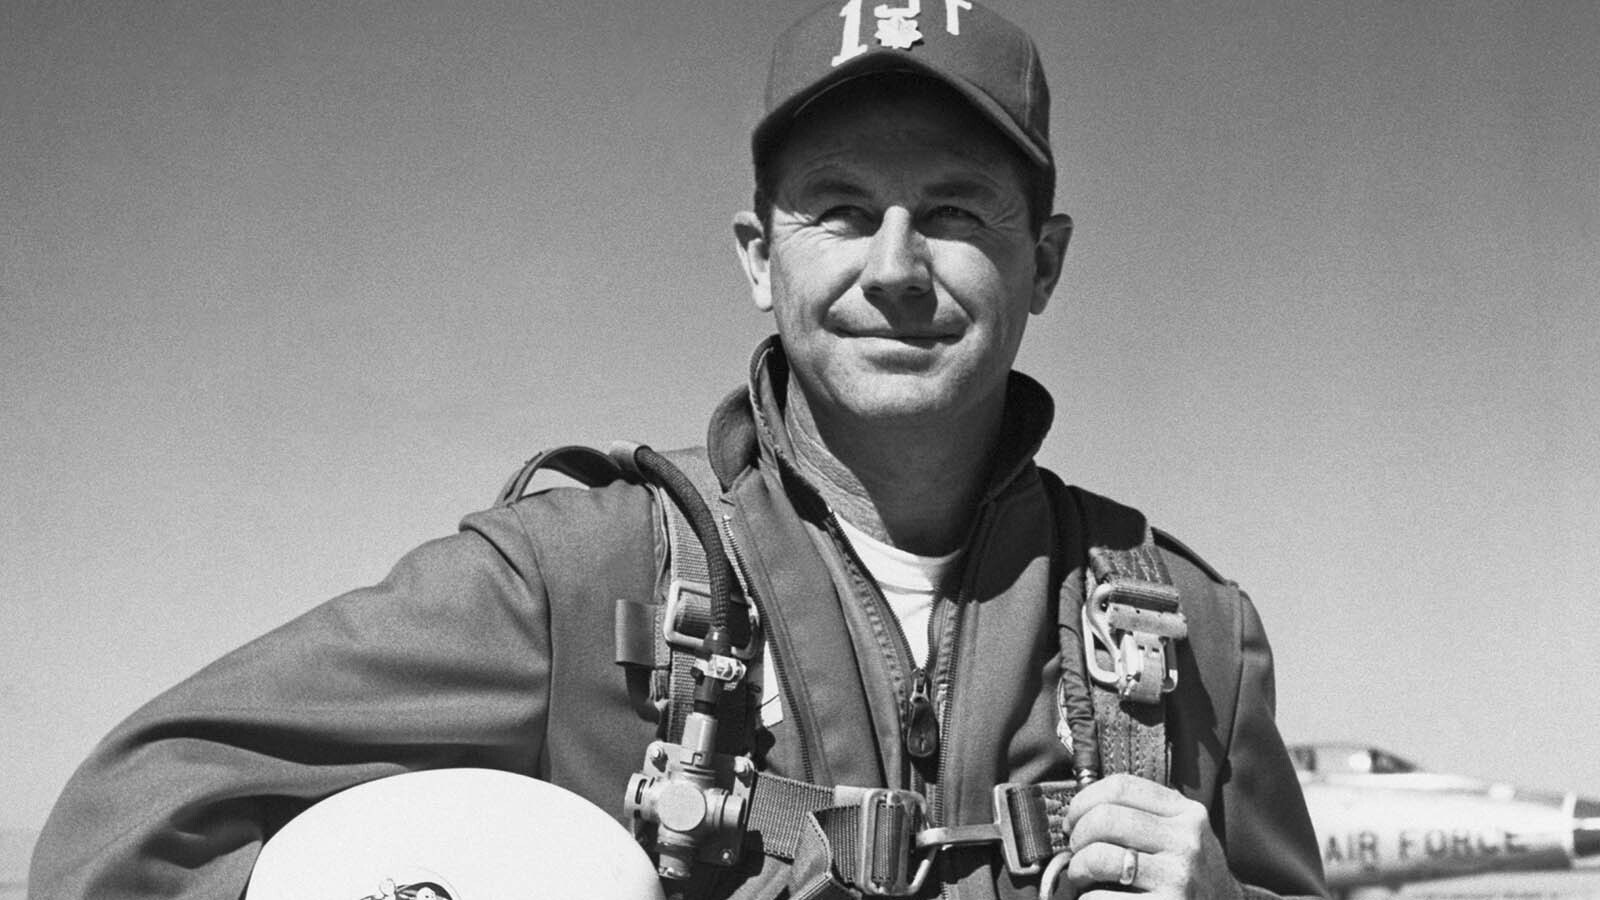 Lt. Col. Charles "Chuck" Yeager in 1958.